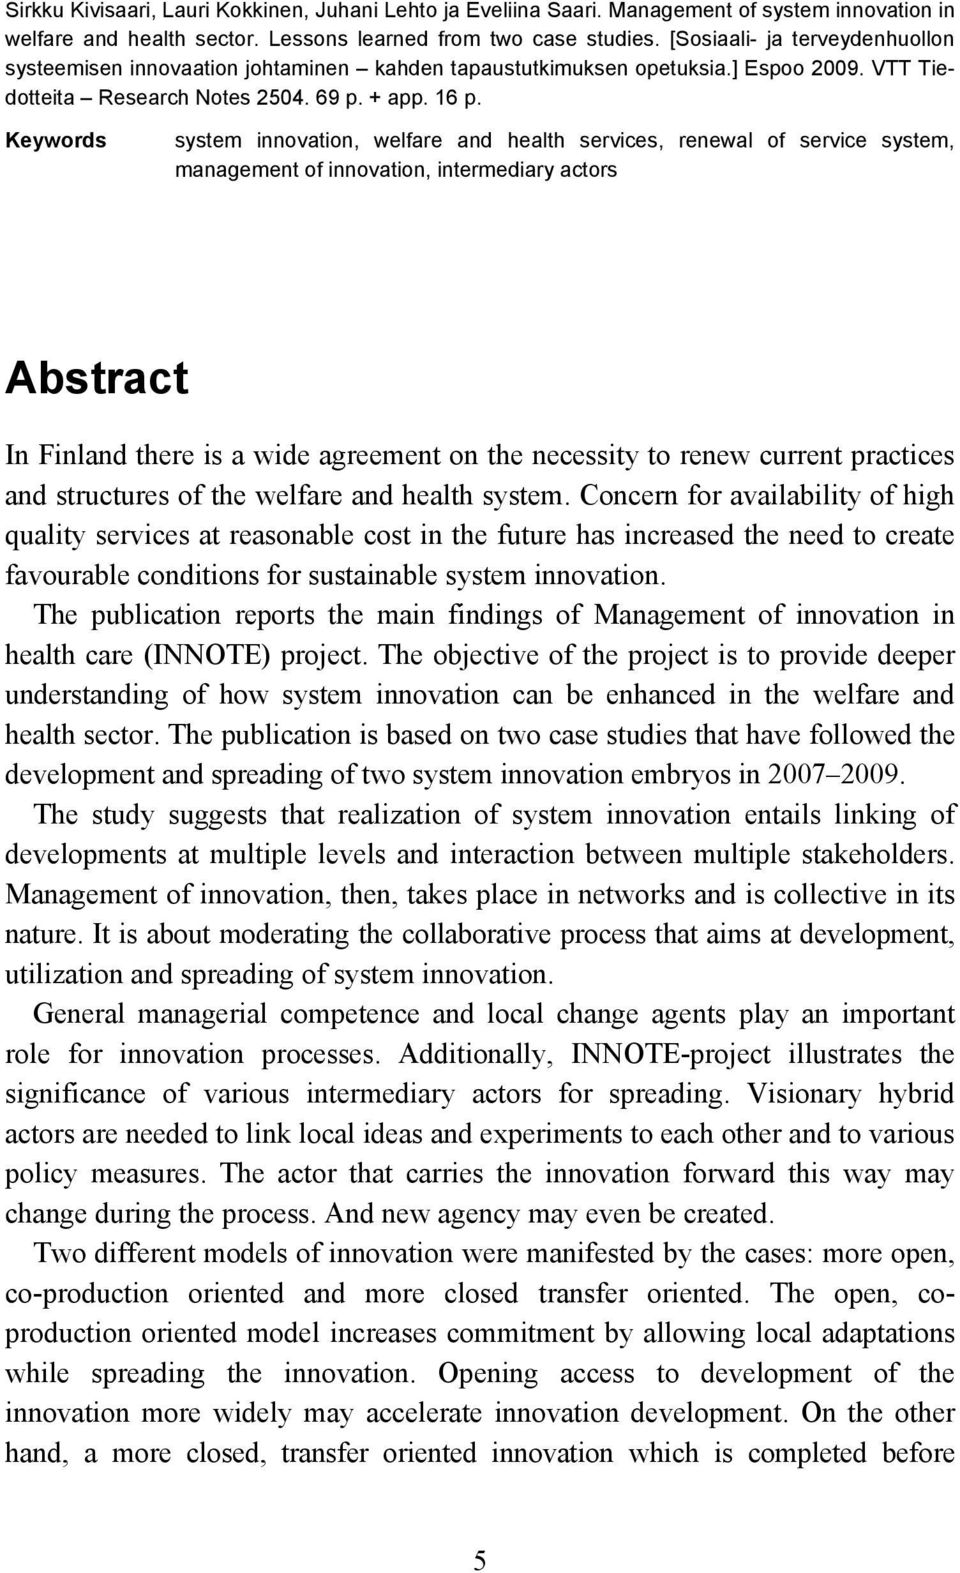 Keywords system innovation, welfare and health services, renewal of service system, management of innovation, intermediary actors Abstract In Finland there is a wide agreement on the necessity to